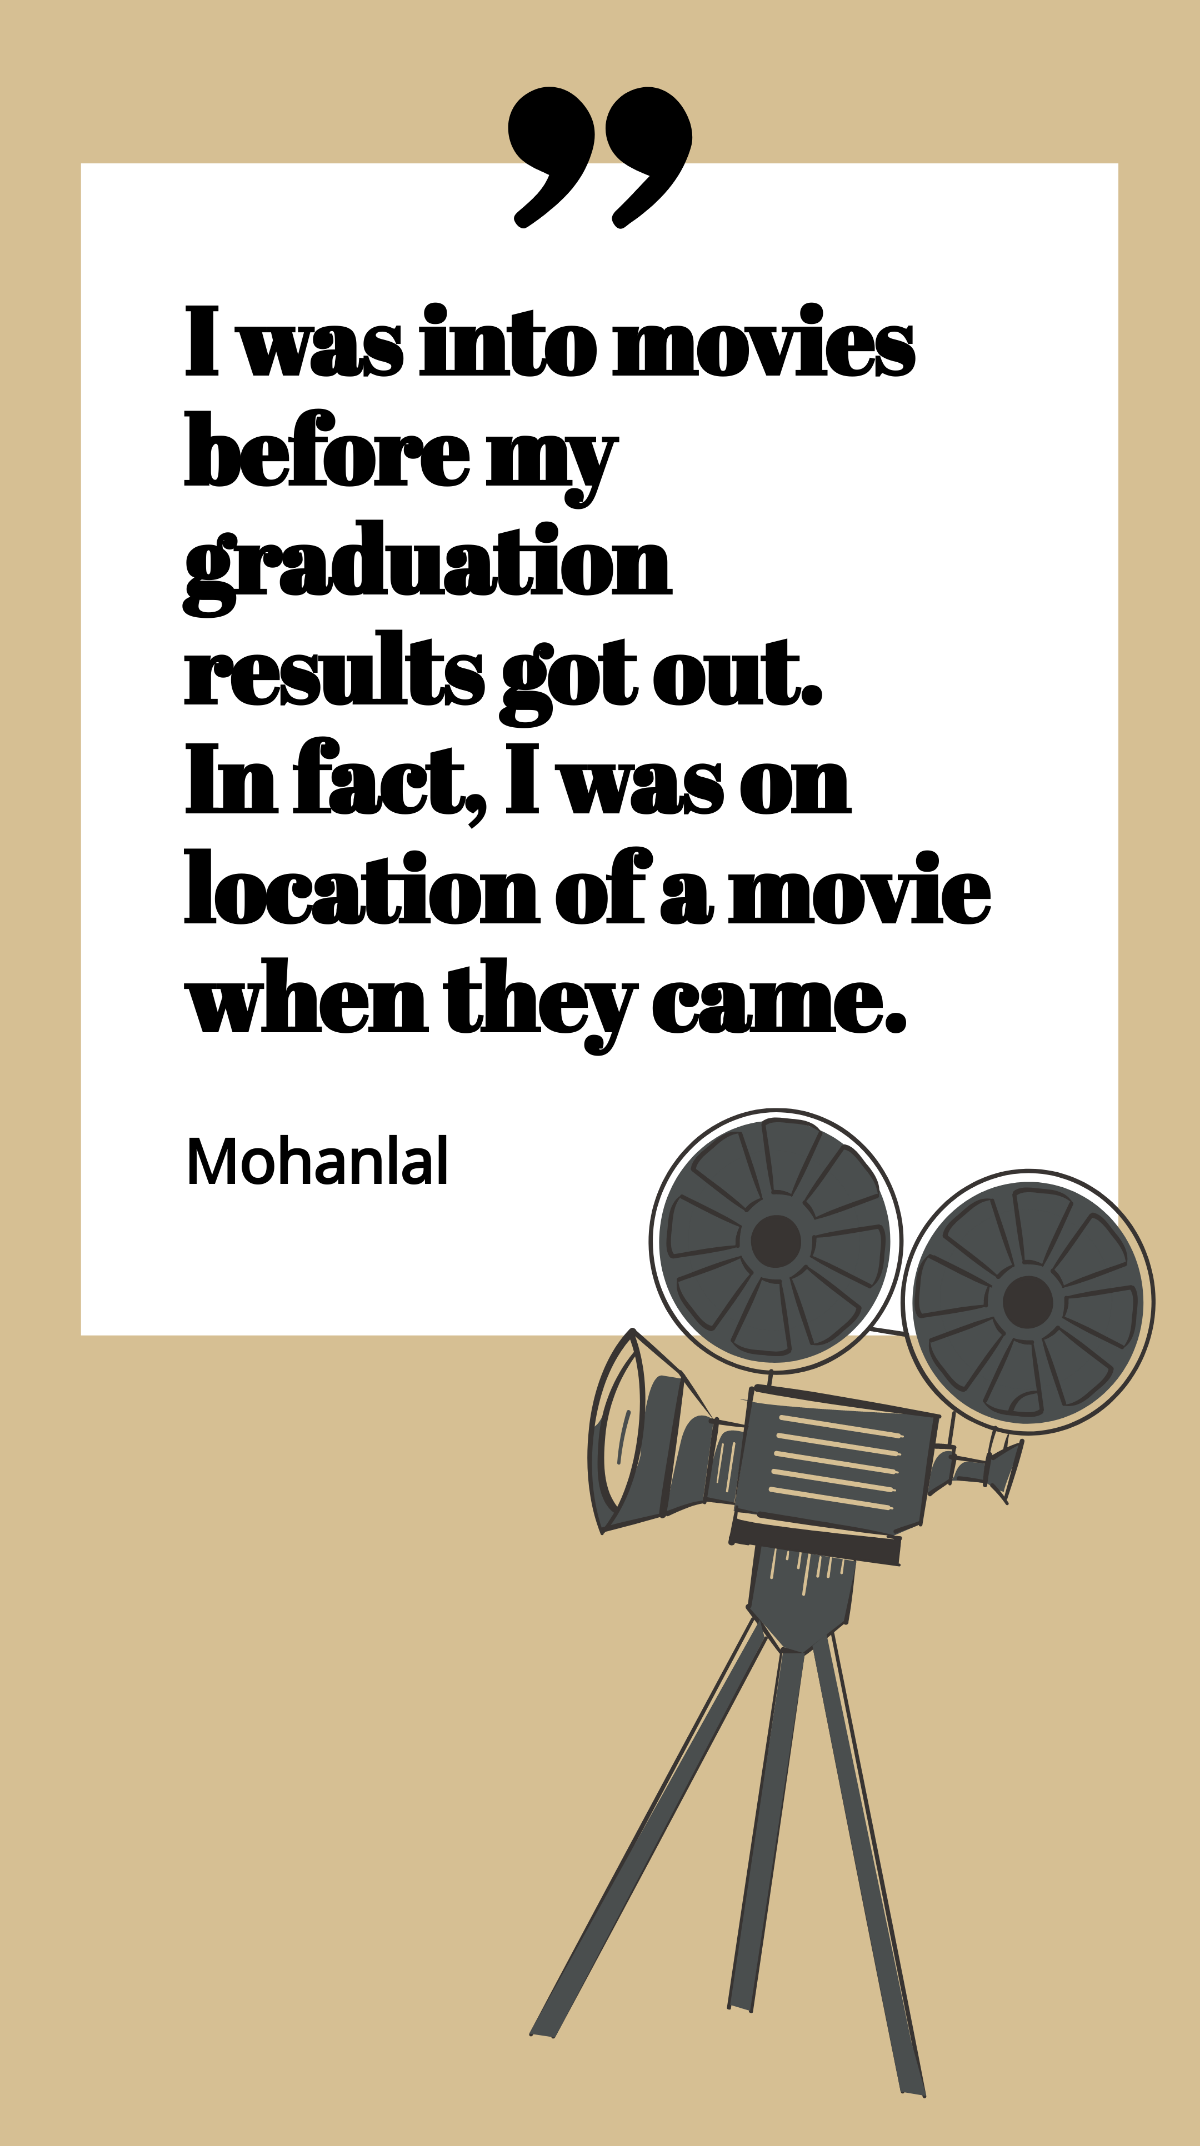 Mohanlal - I was into movies before my graduation results got out. In fact, I was on location of a movie when they came. Template